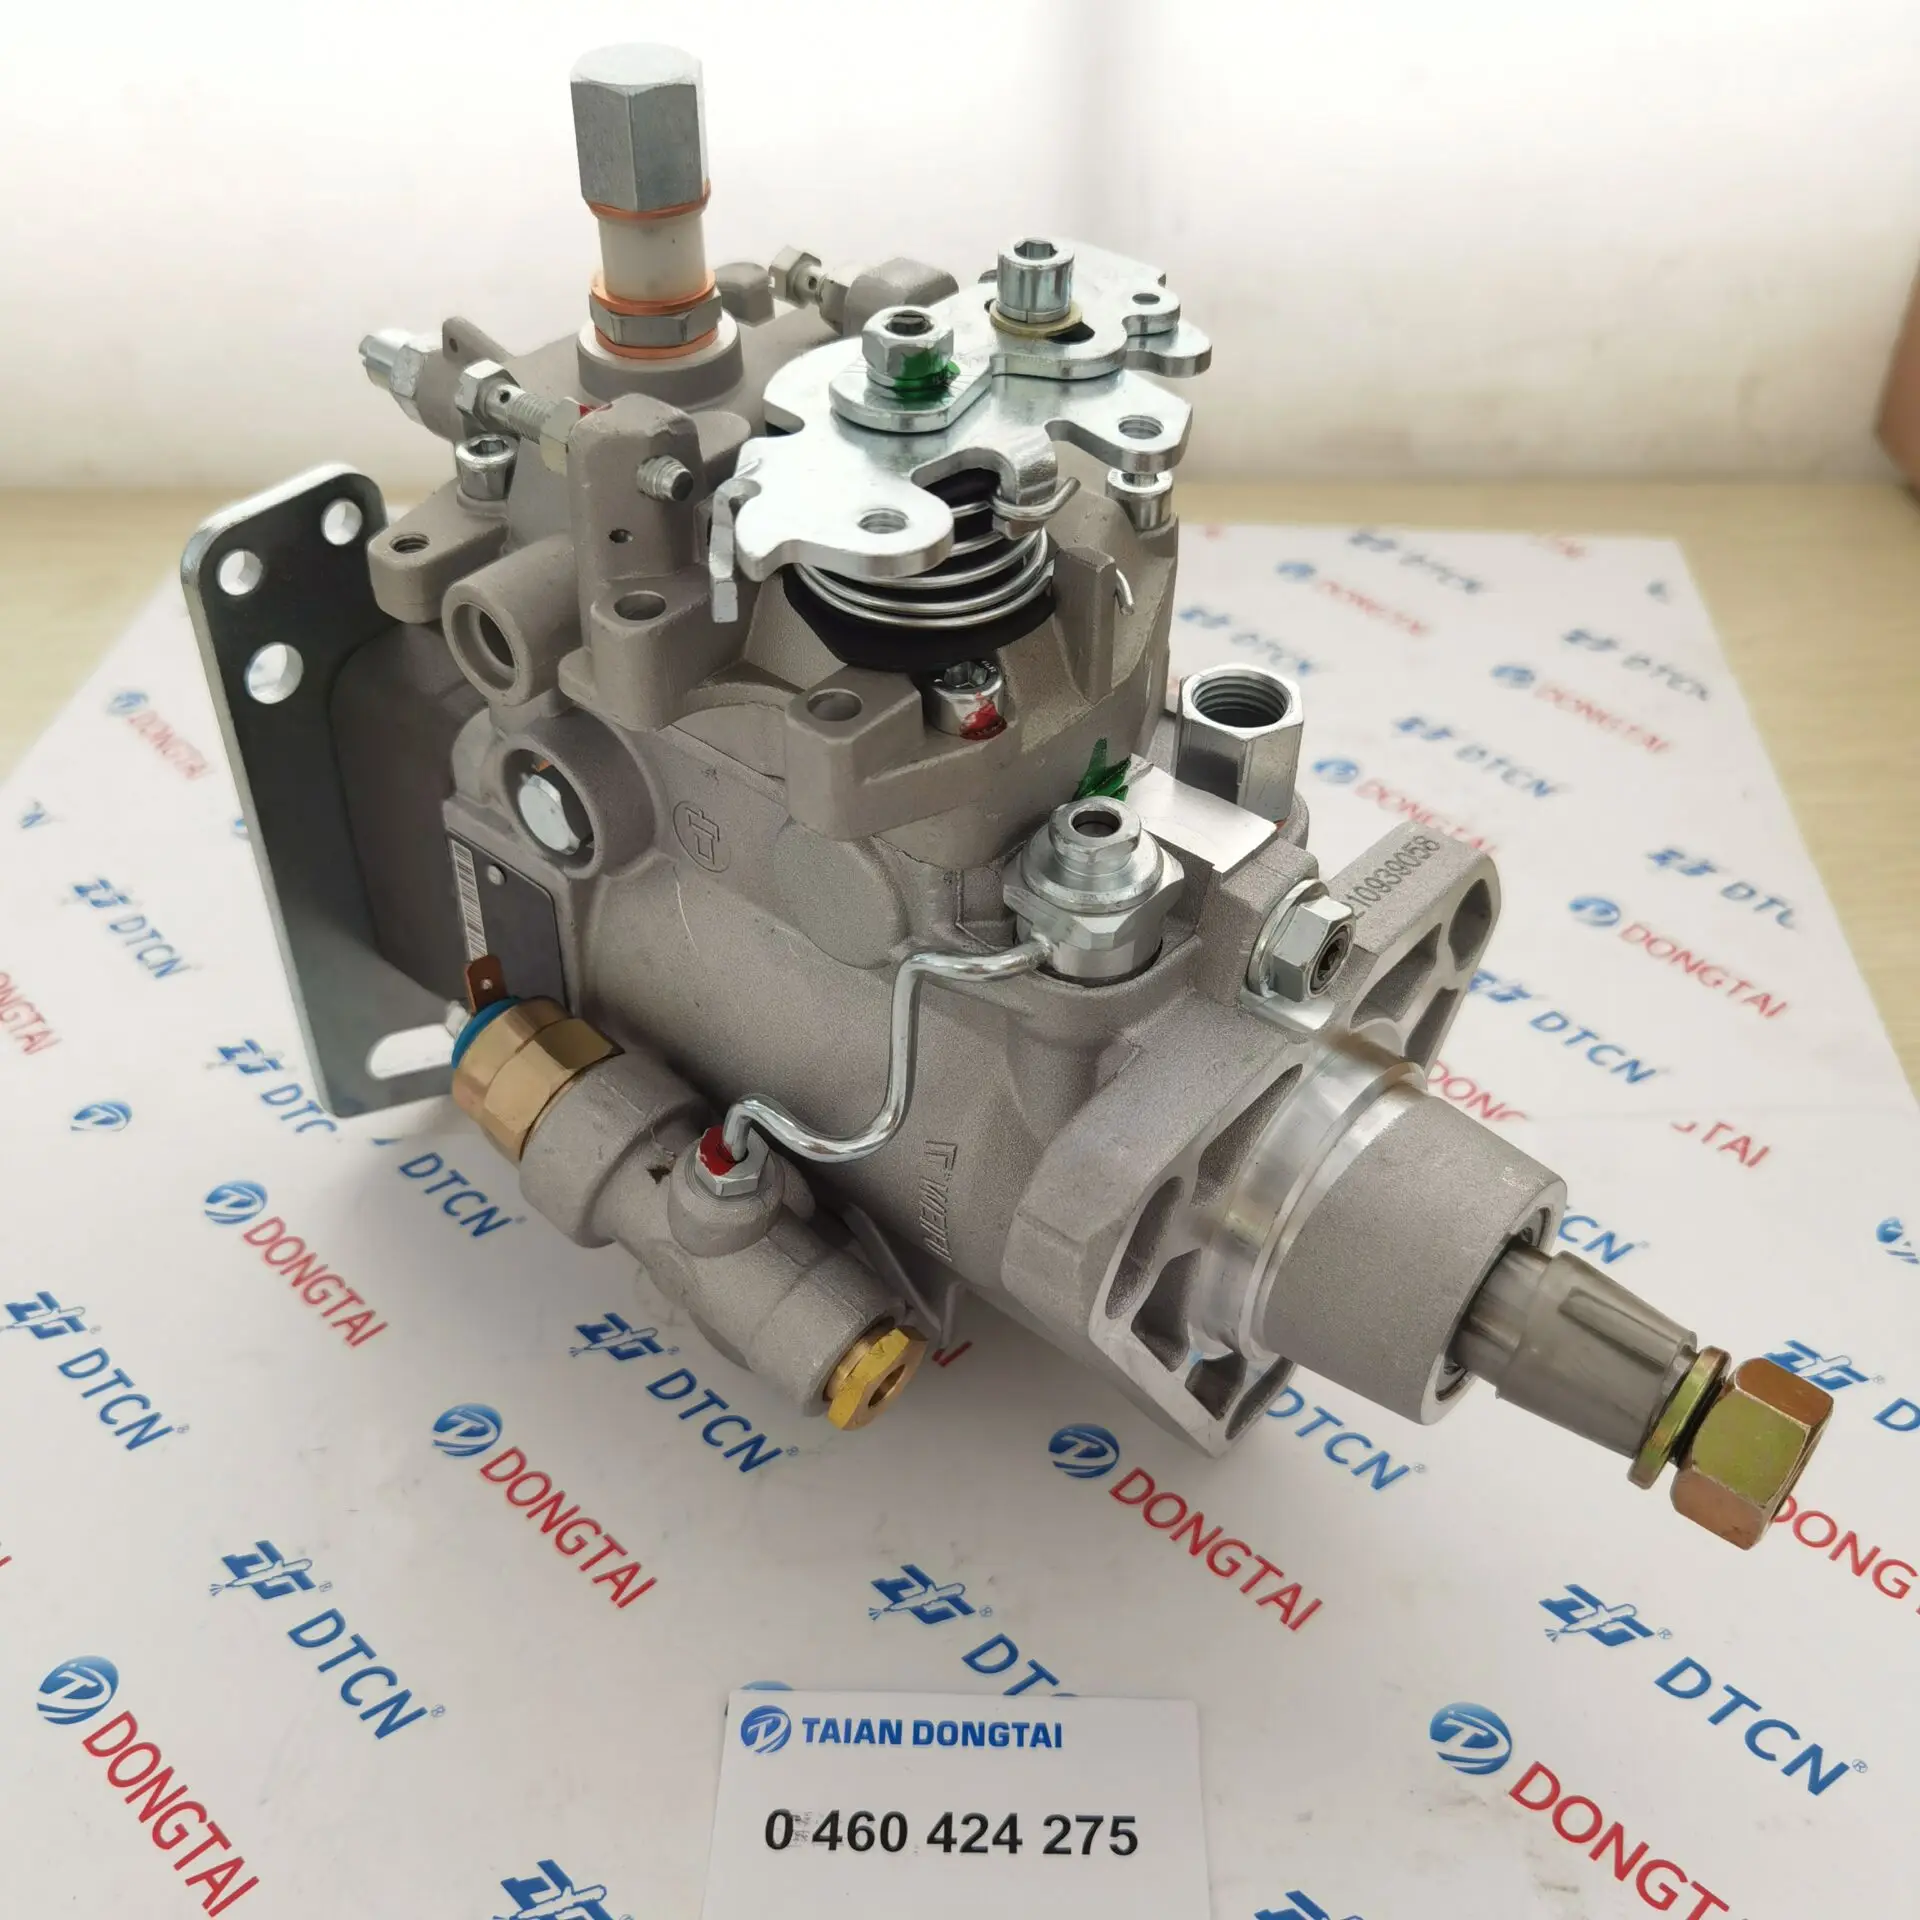 Good Quality Ve 4 Cyl Diesel Fuel Injection Pump 0 460 424 275/504063803  /2854949 For Case New Holland 4.4l Engine - Buy 0 460 424 275,Fuel  Injection